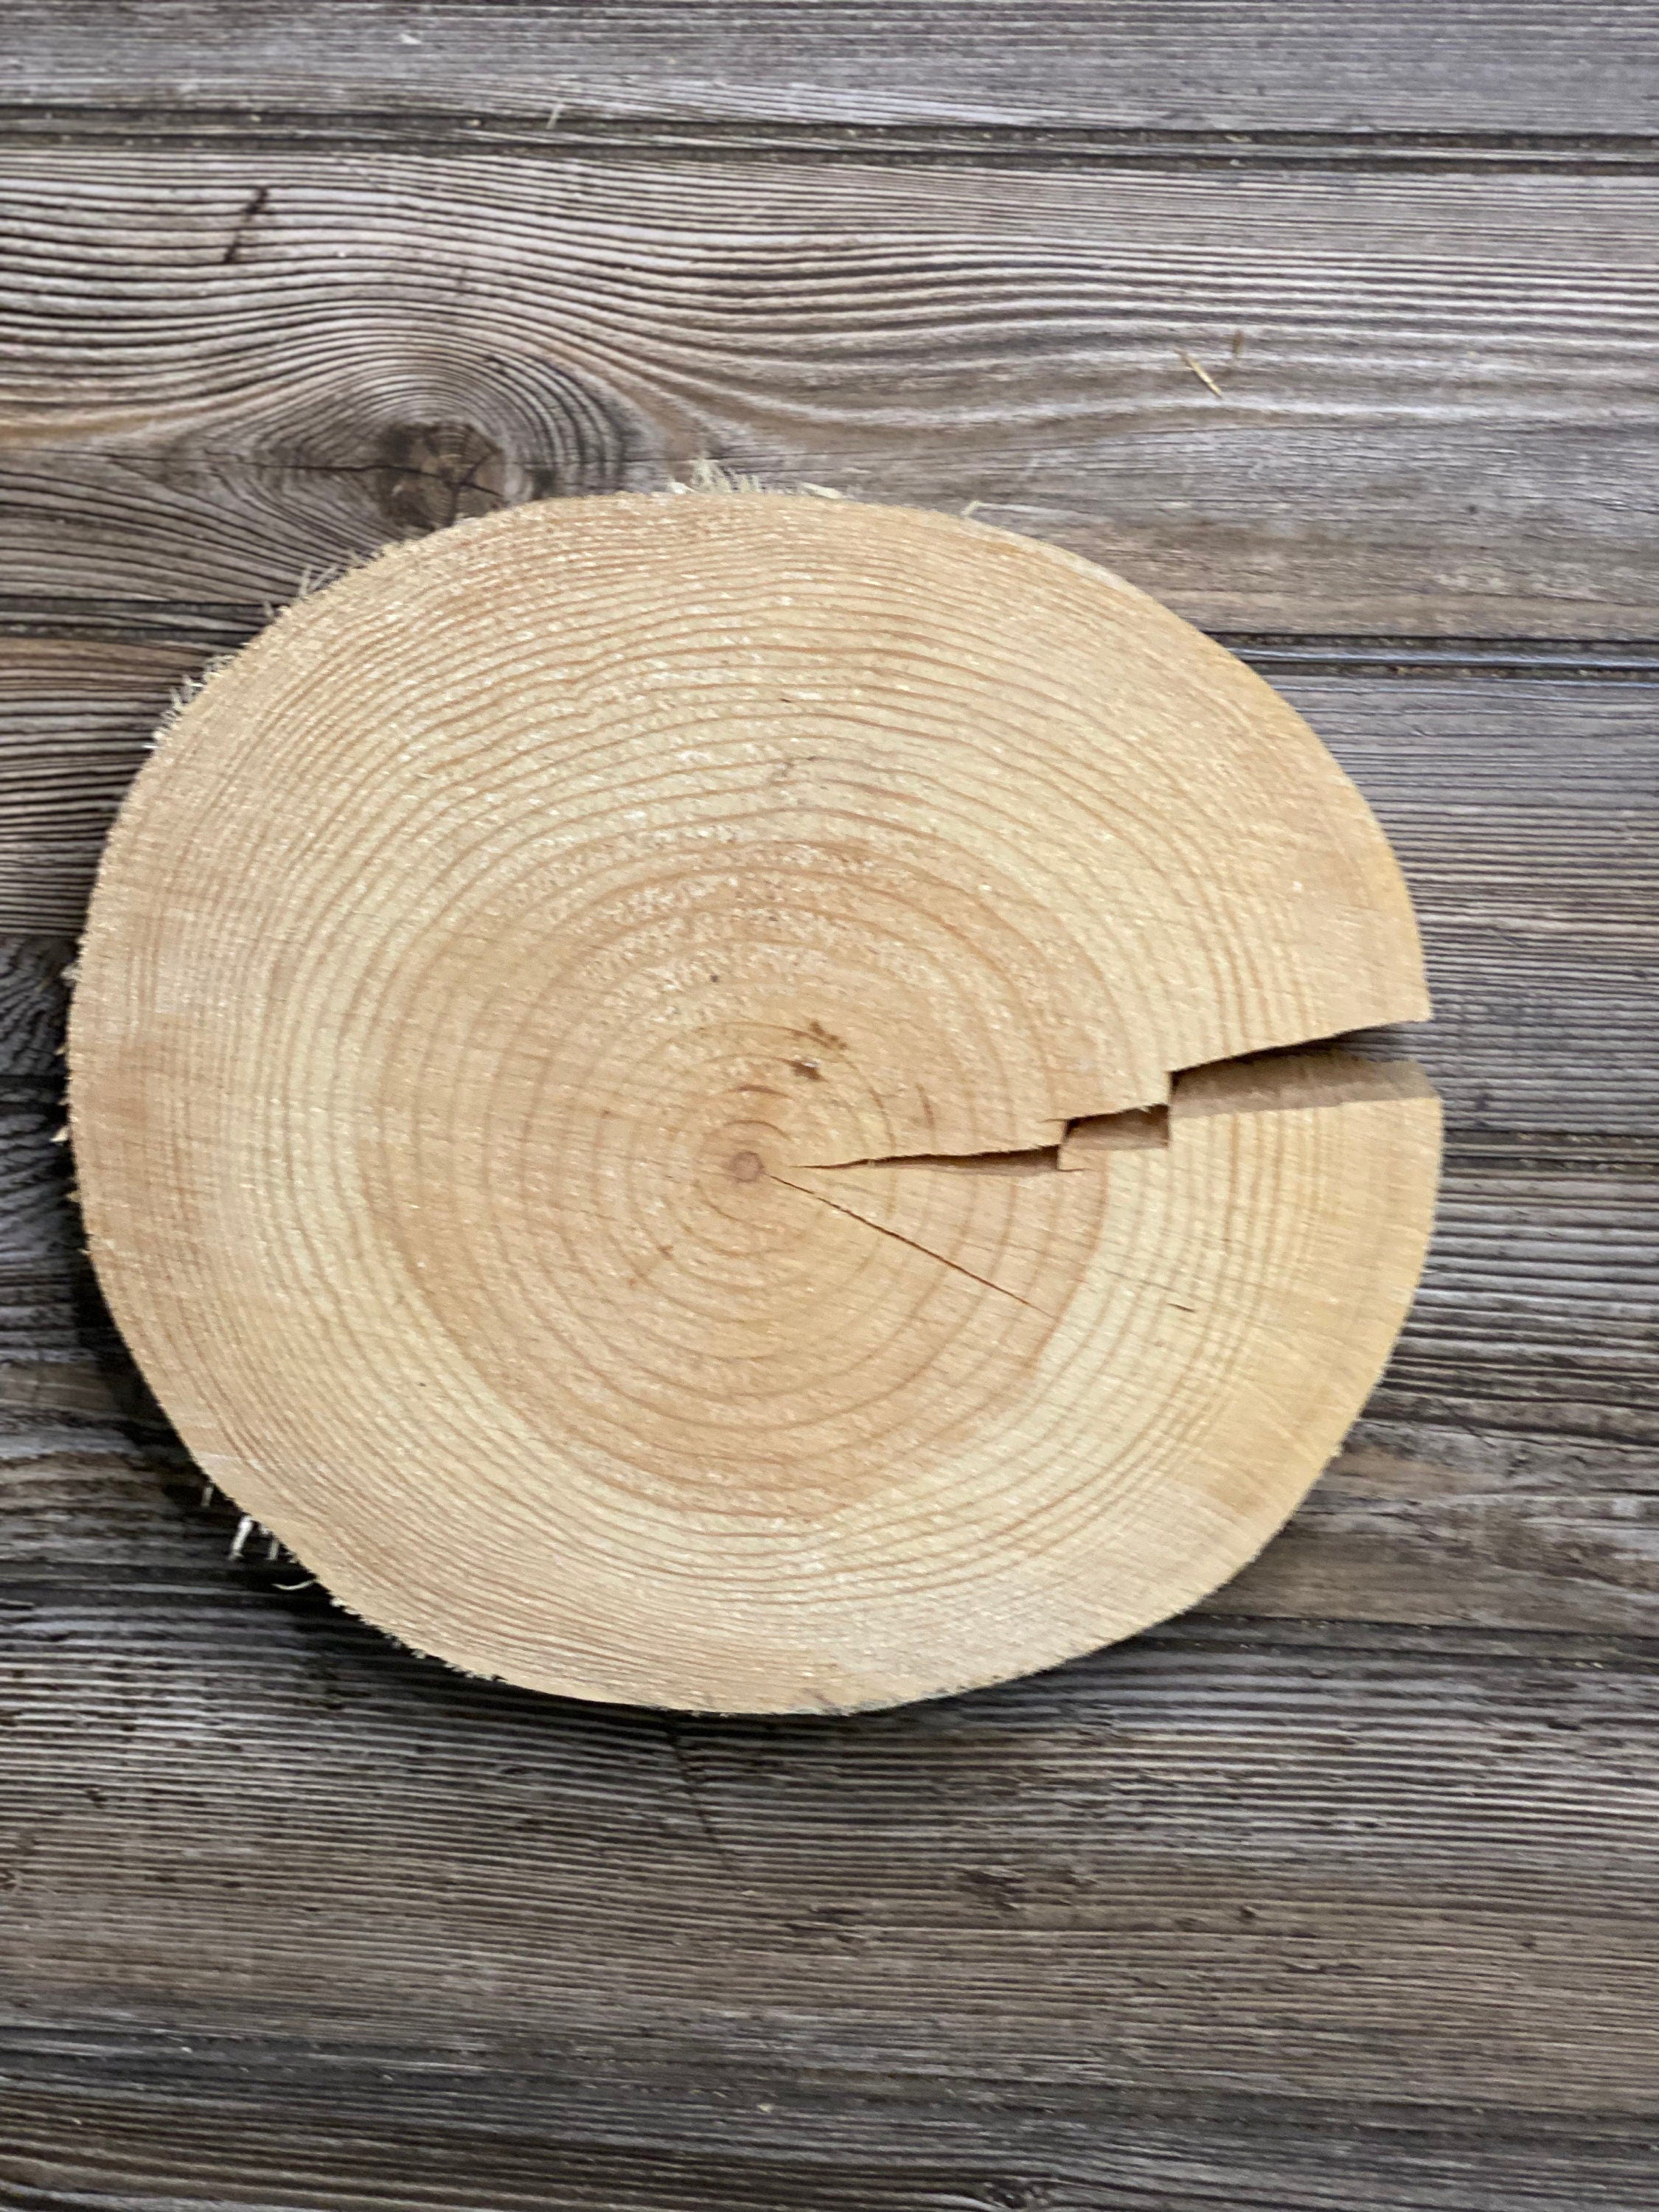 Pine Slice, Approximately 10.5 Inches Long by 9.5 Inches Wide and 2.5 Inches Tall